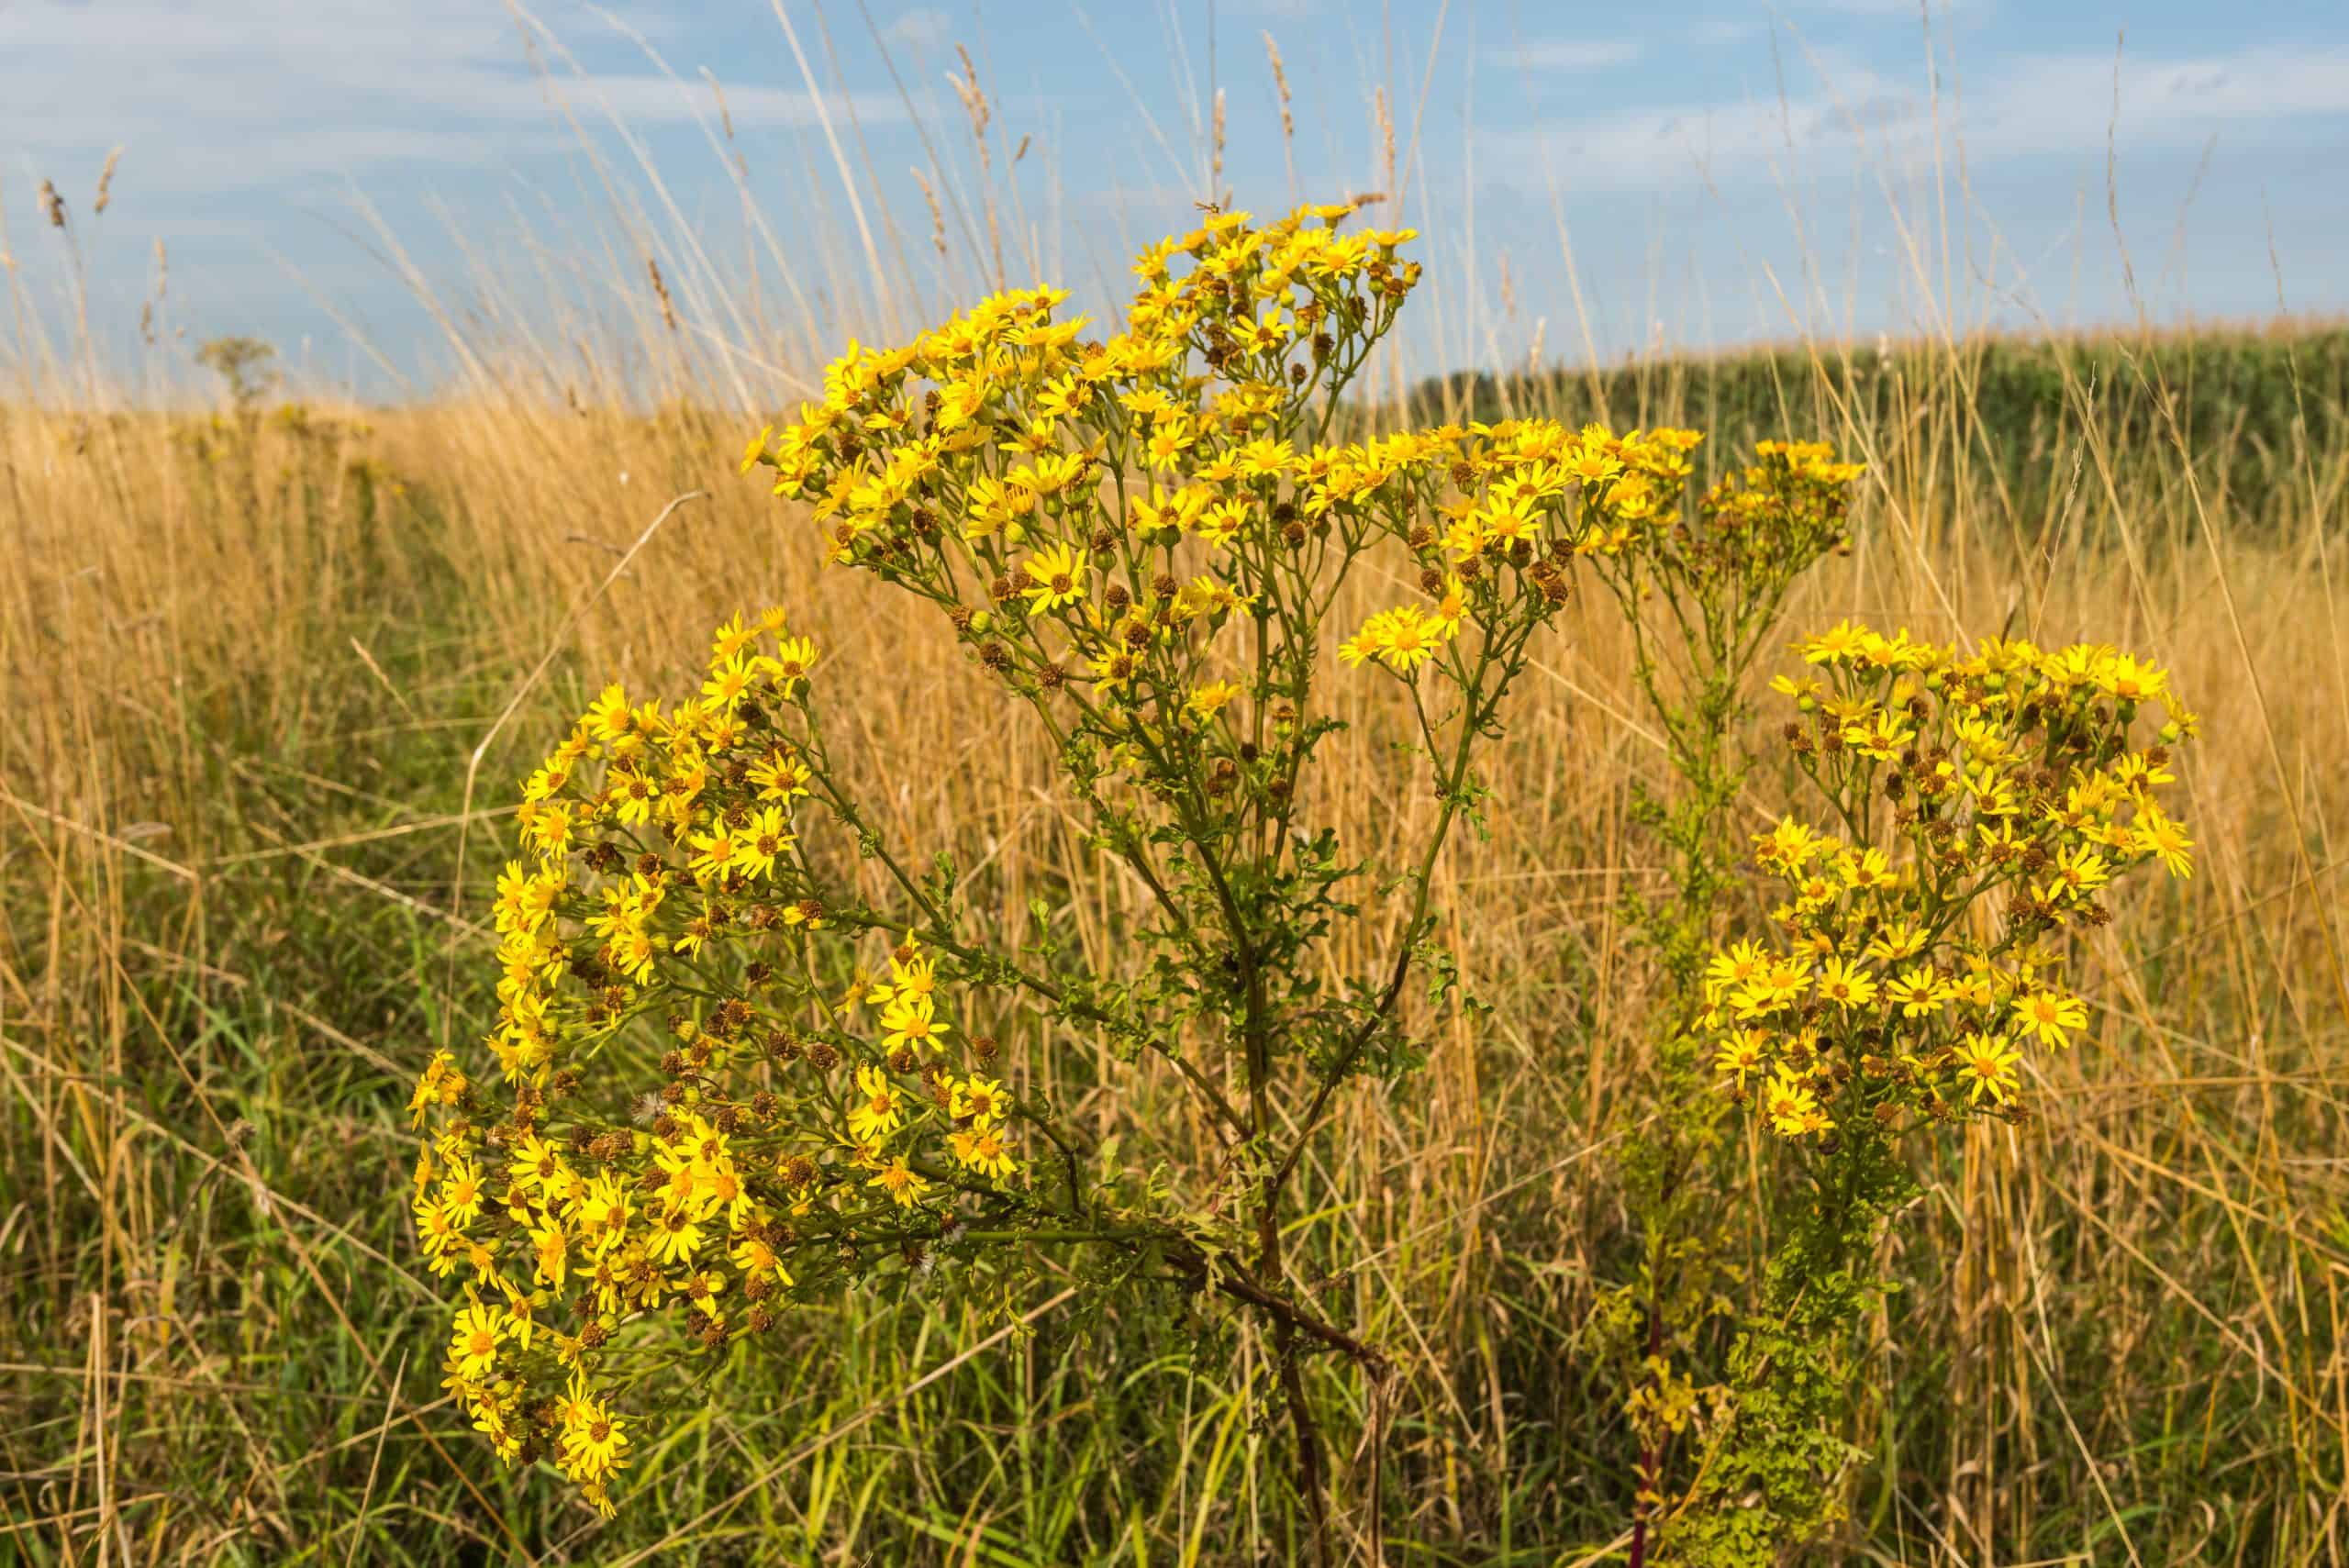 Closeup of yellow flowering tansy ragwort in front of yellowed grasses and a field with silage maize plants.